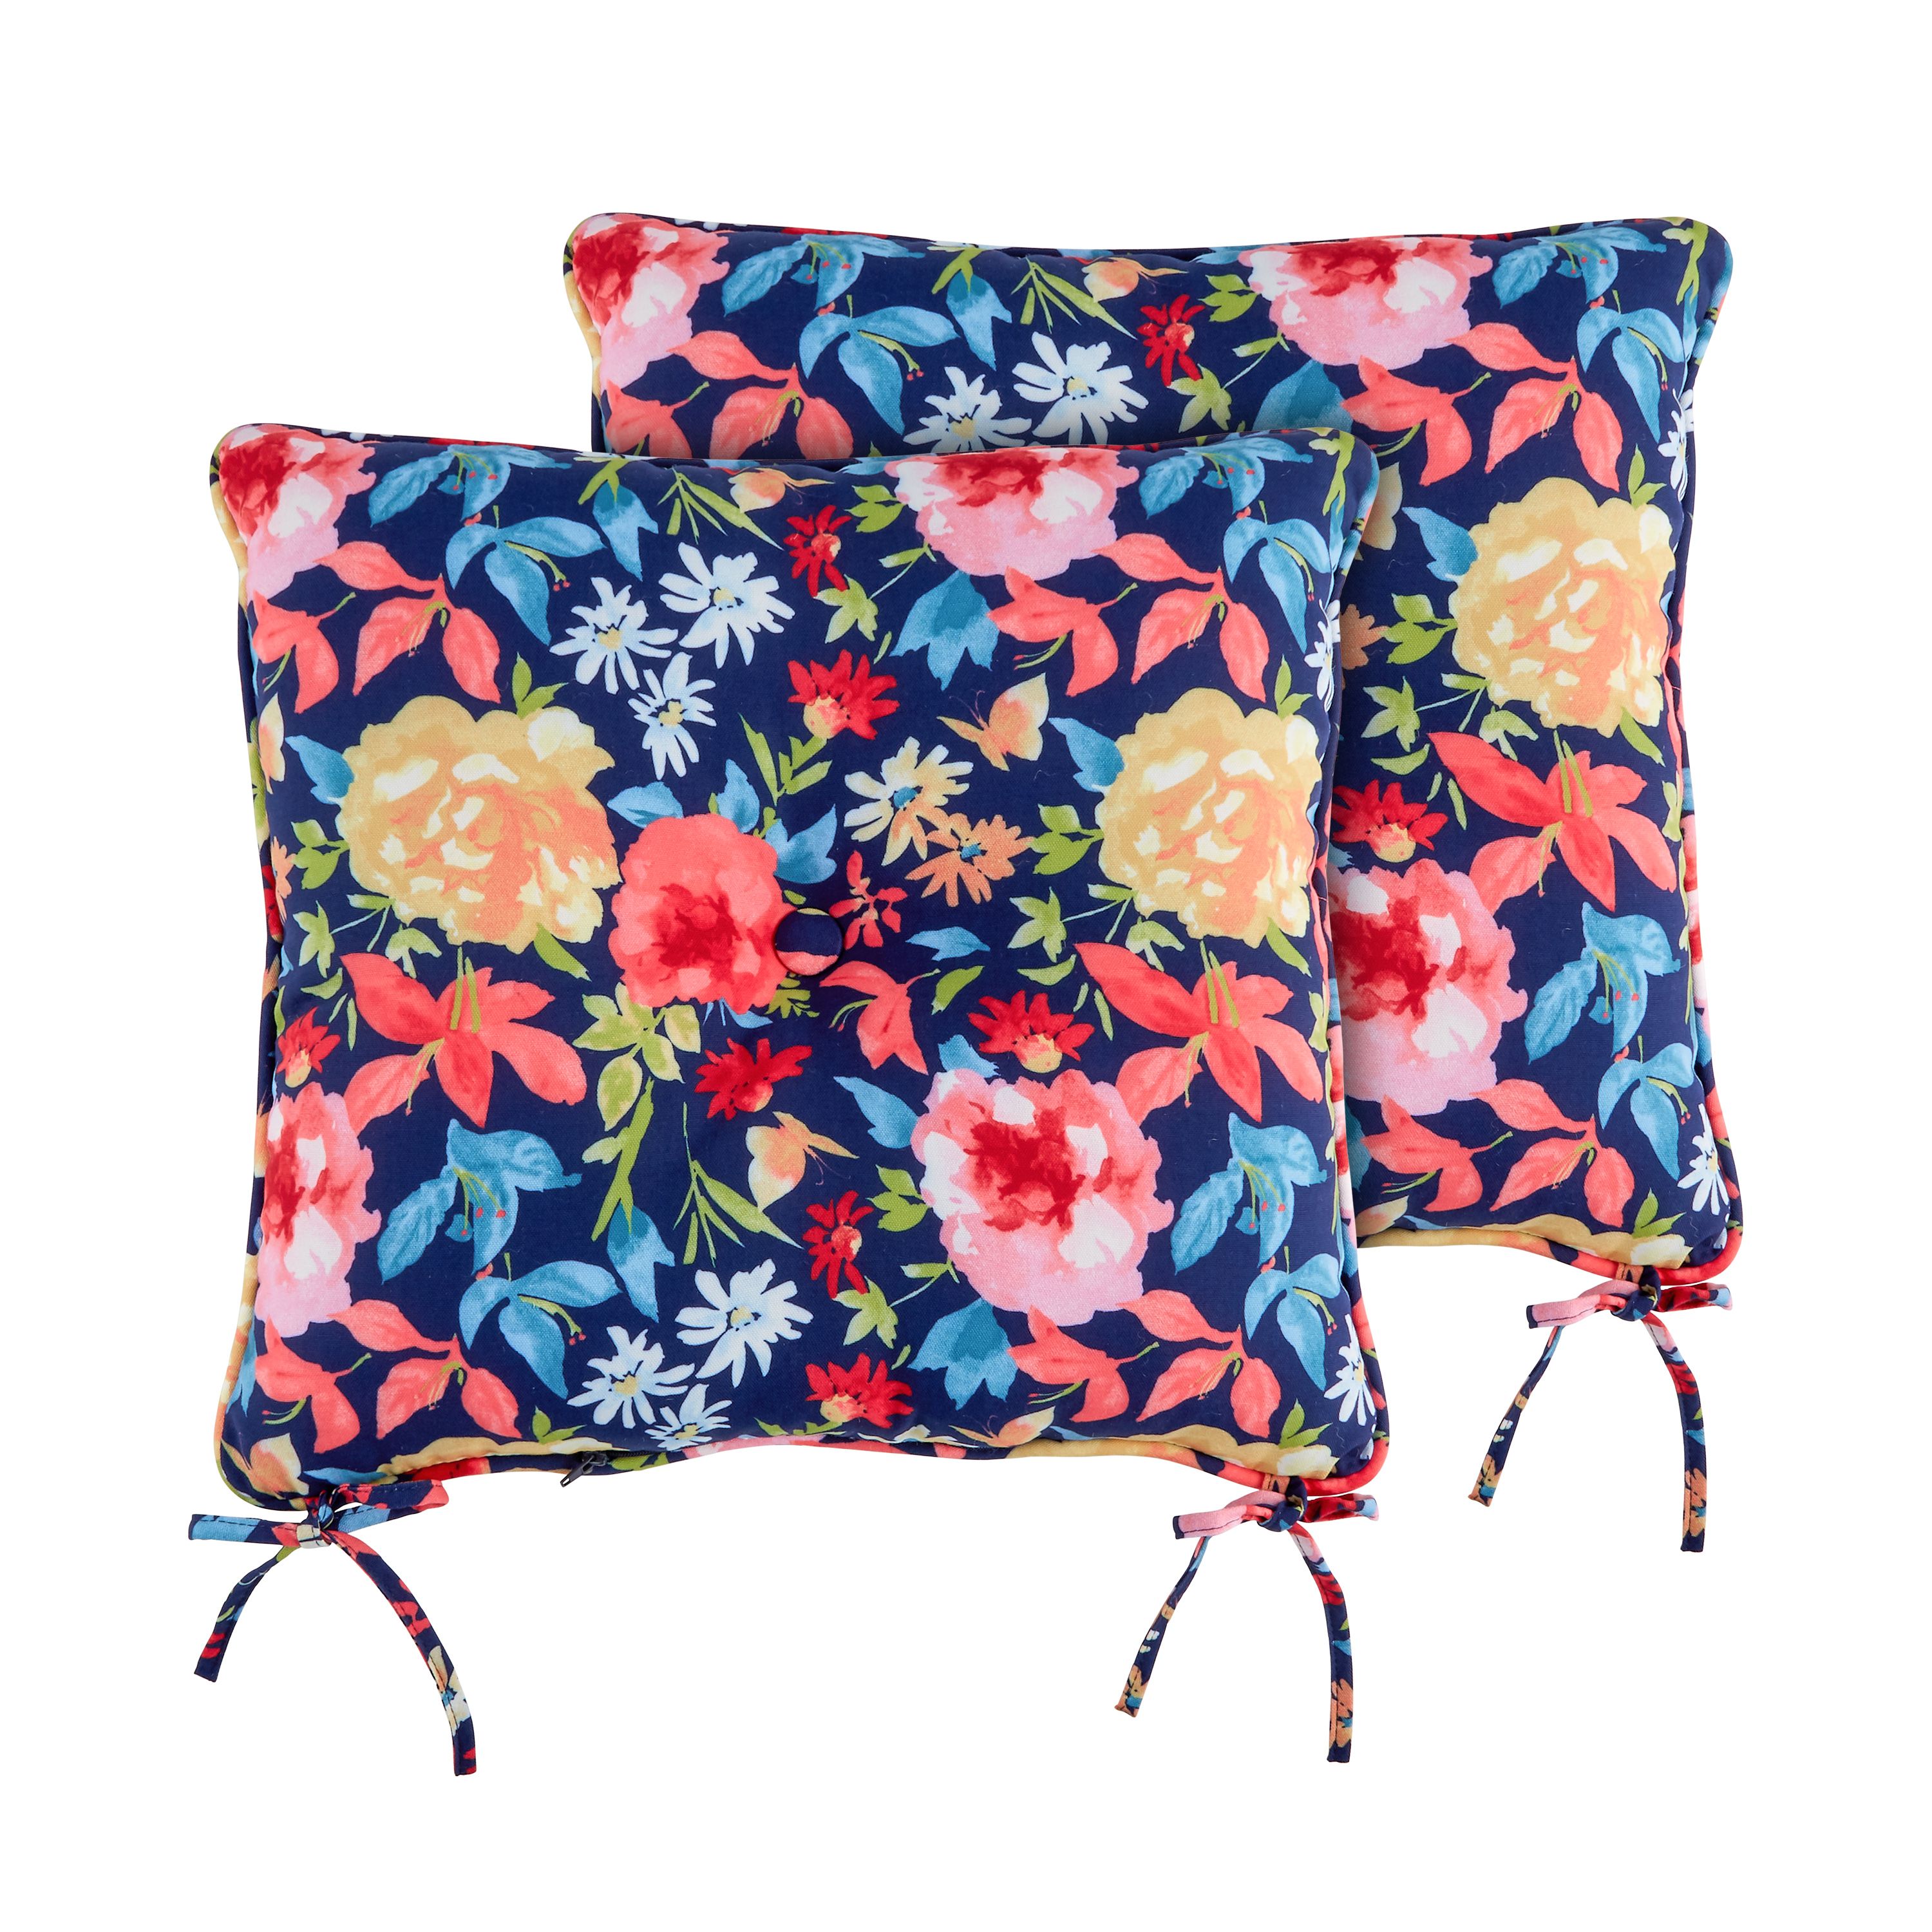 The Pioneer Woman Fiona Floral Outdoor Seat Pad